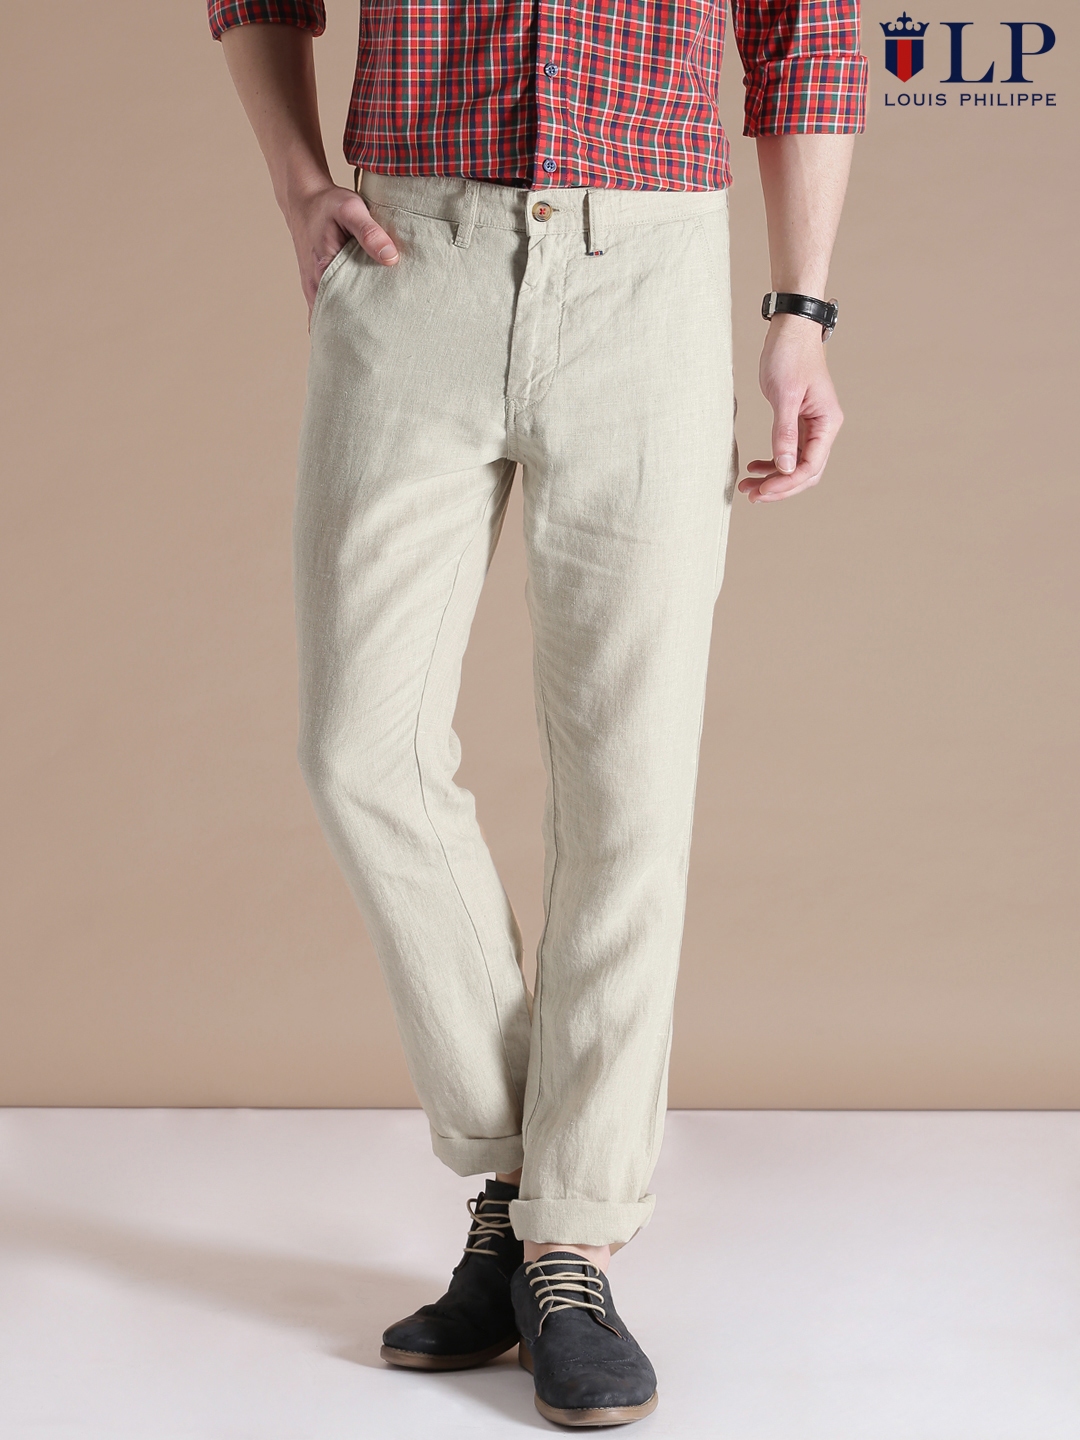 Buy Louis Philippe Beige Linen Sundance Fit Casual Trousers - Trousers for Men 1393029 | Myntra